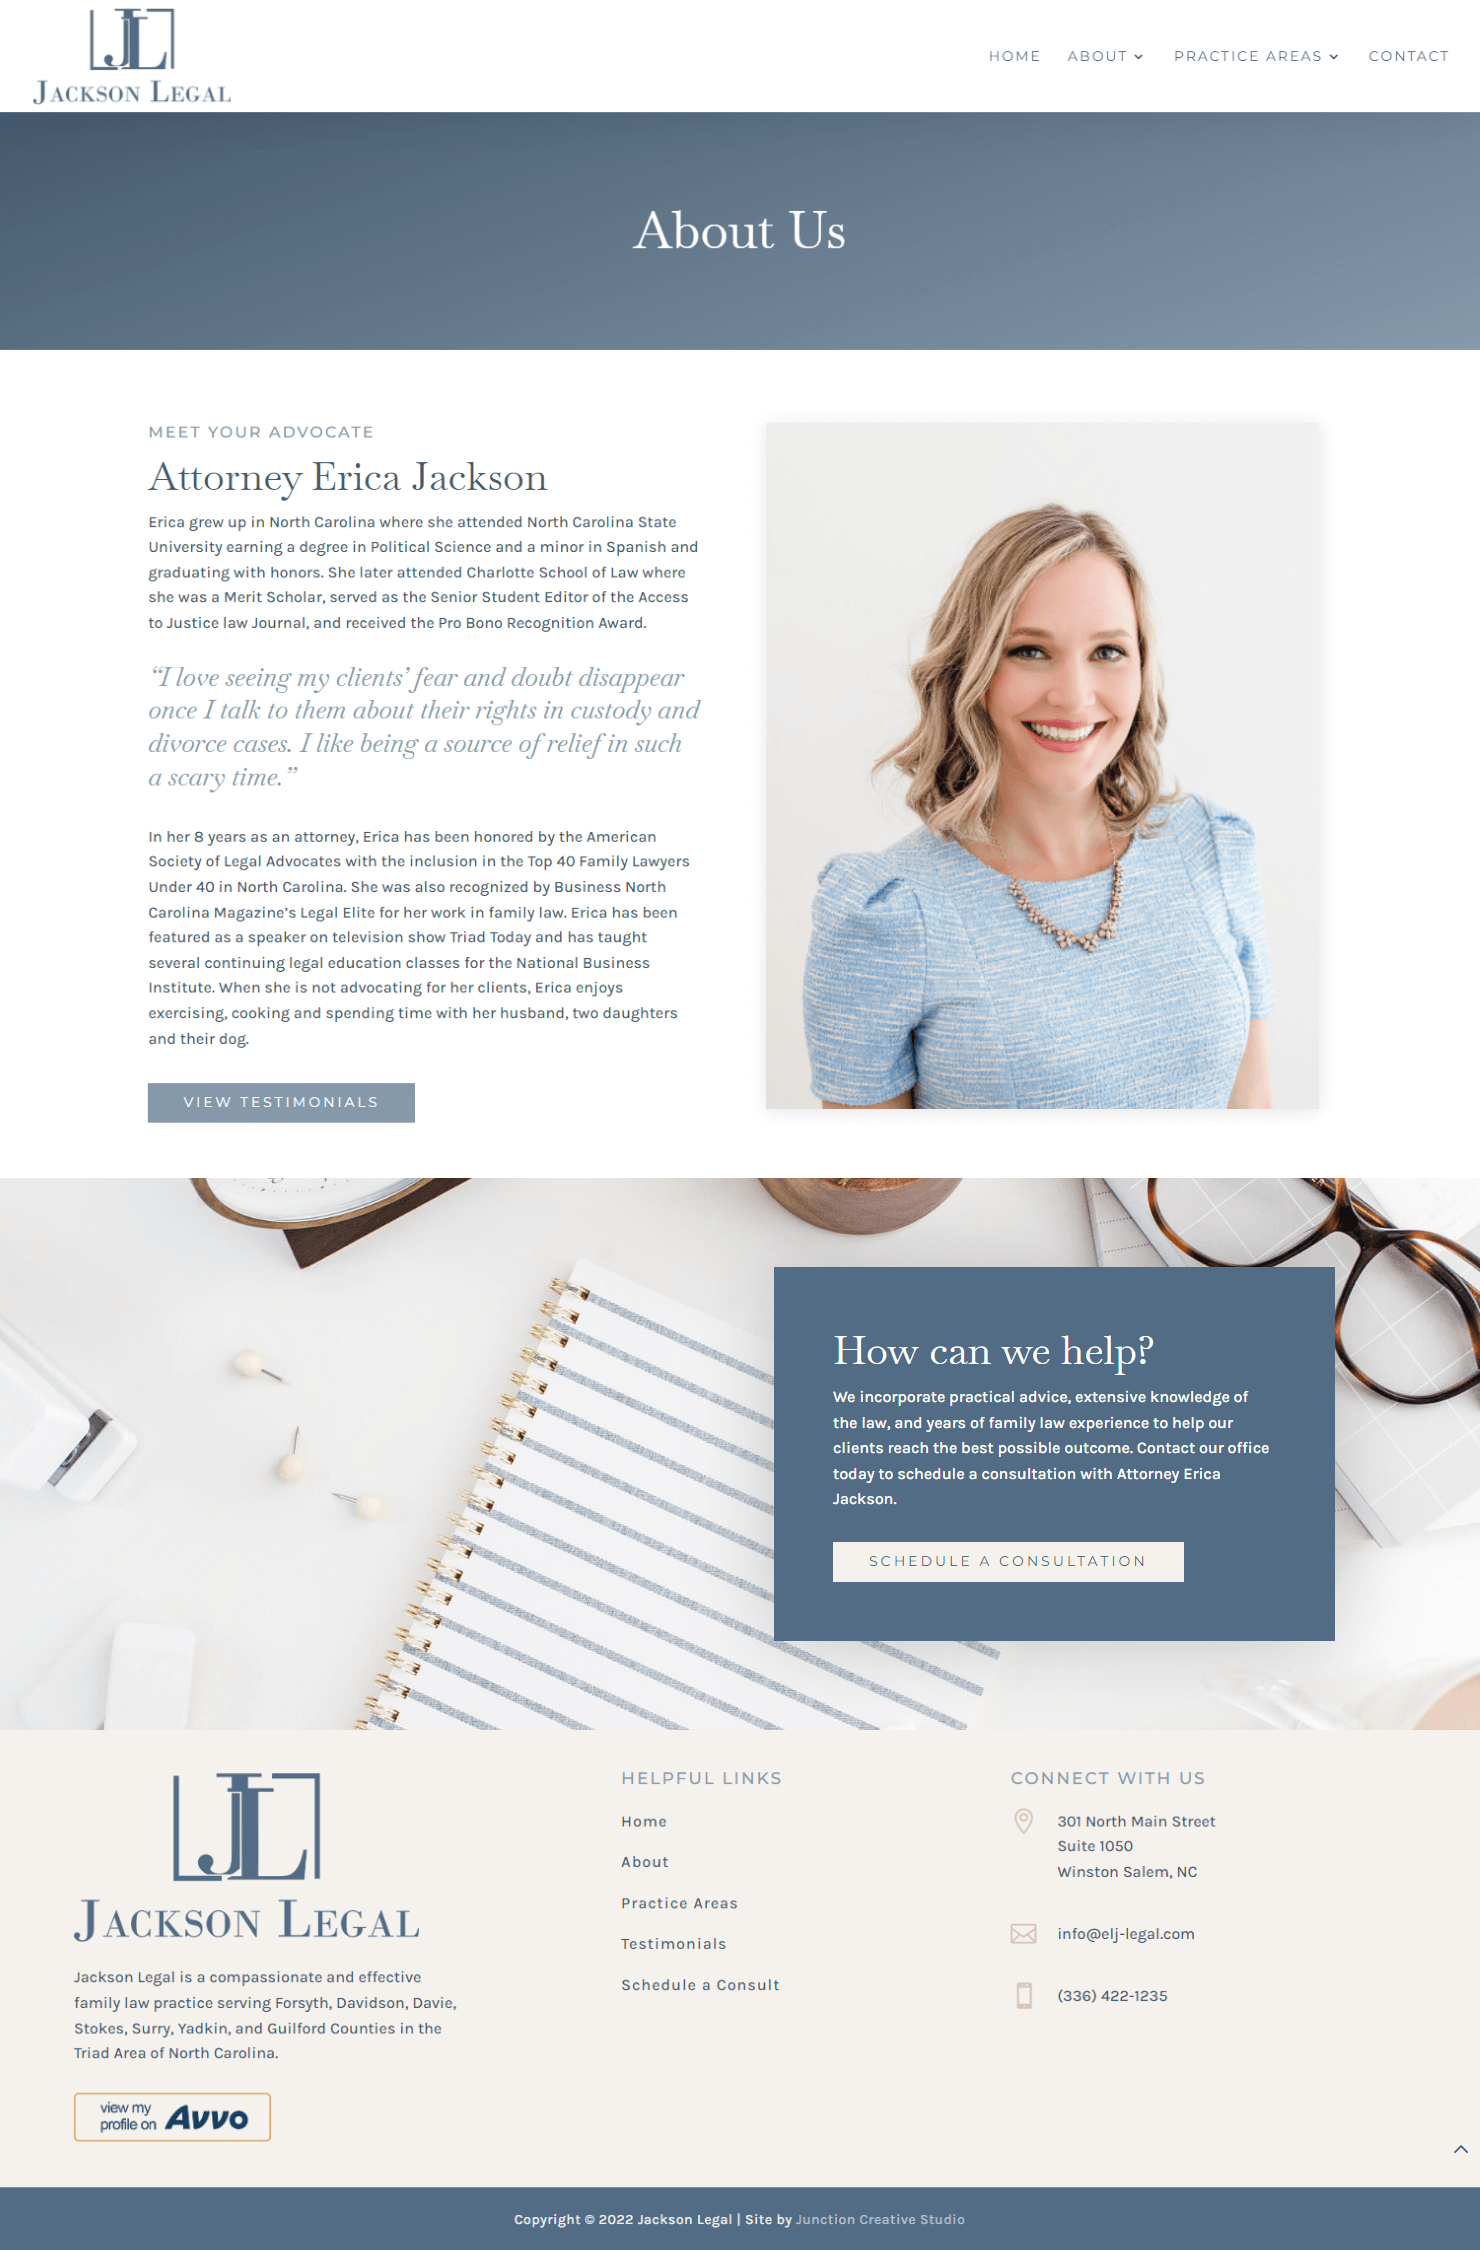 Law Firm About Page Design | Website by Junction Creative Studio